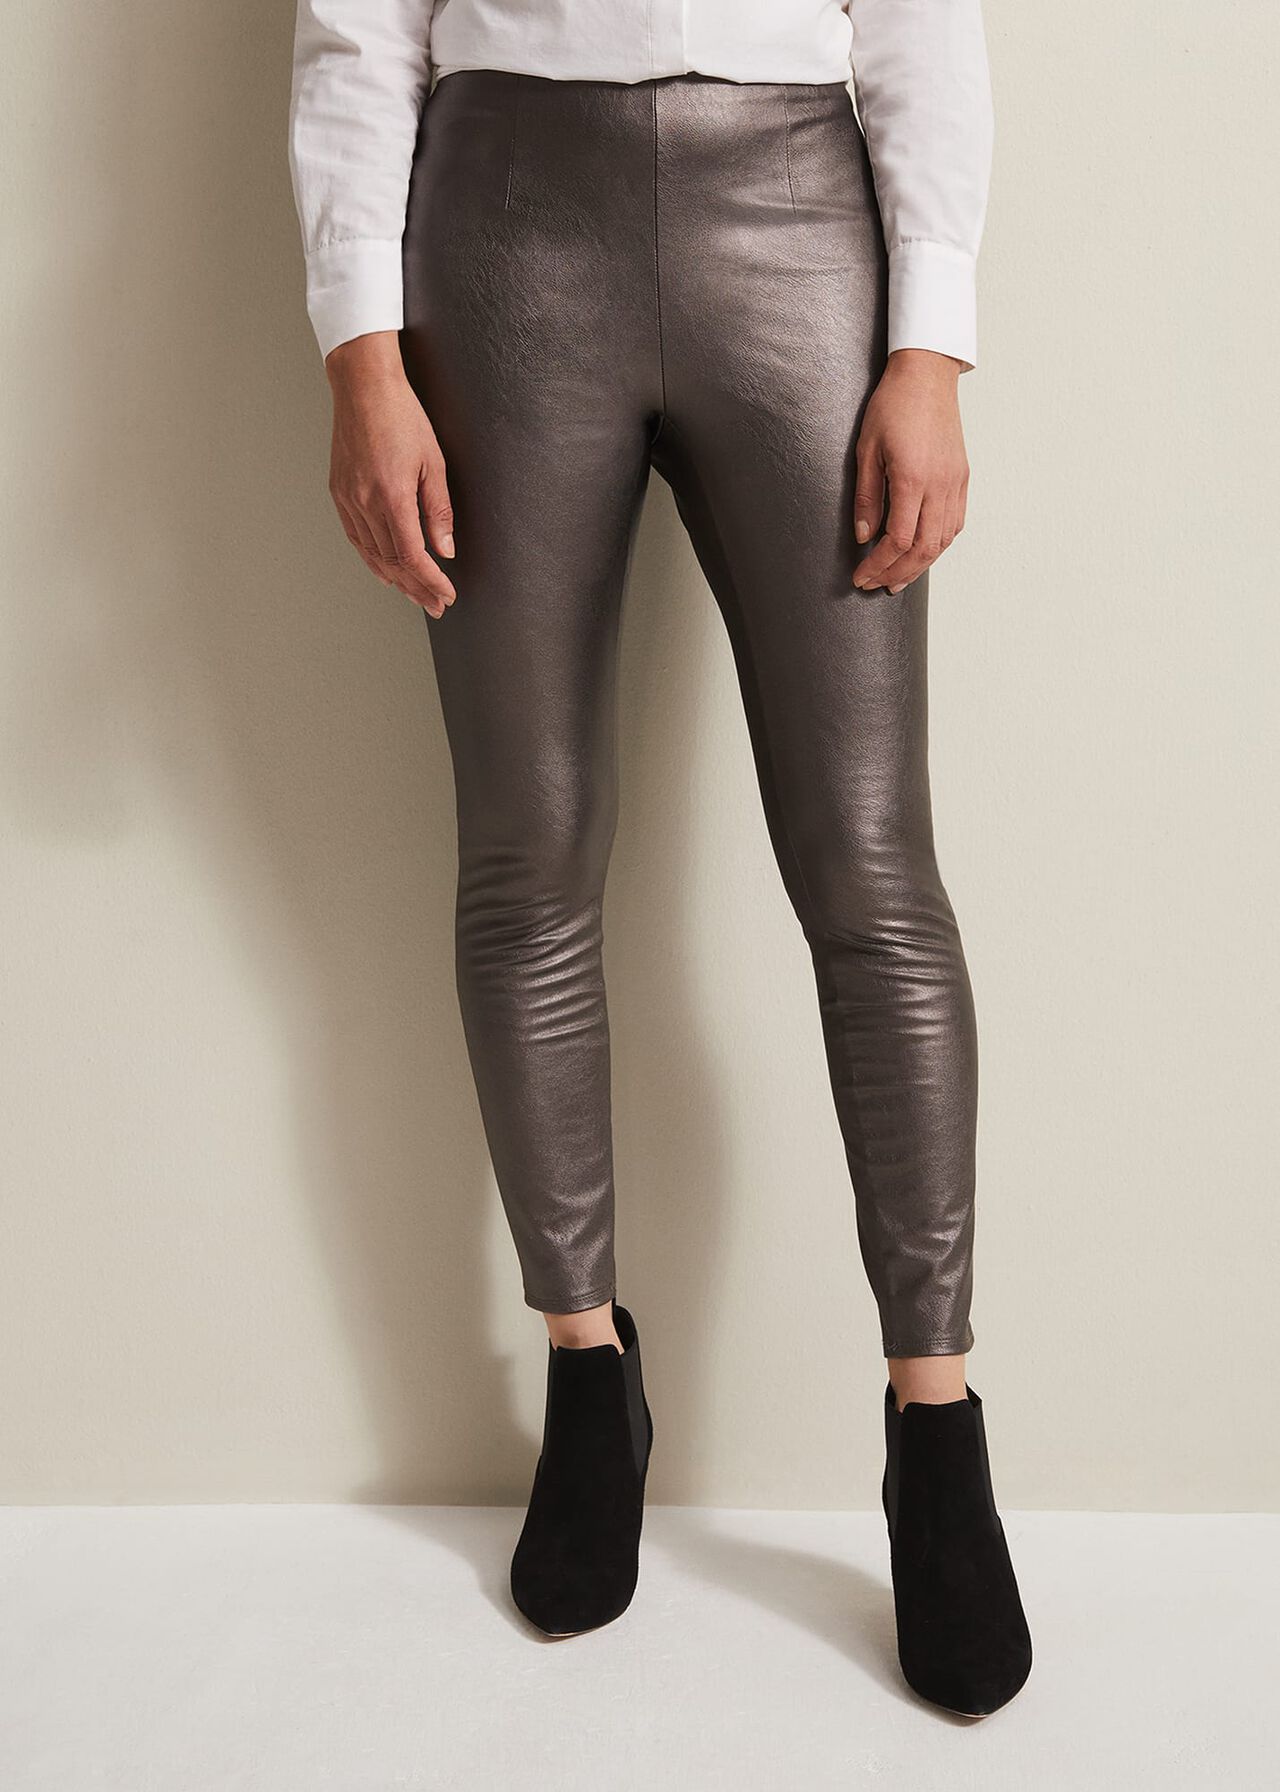 Amina Silver Faux Leather Jeggings